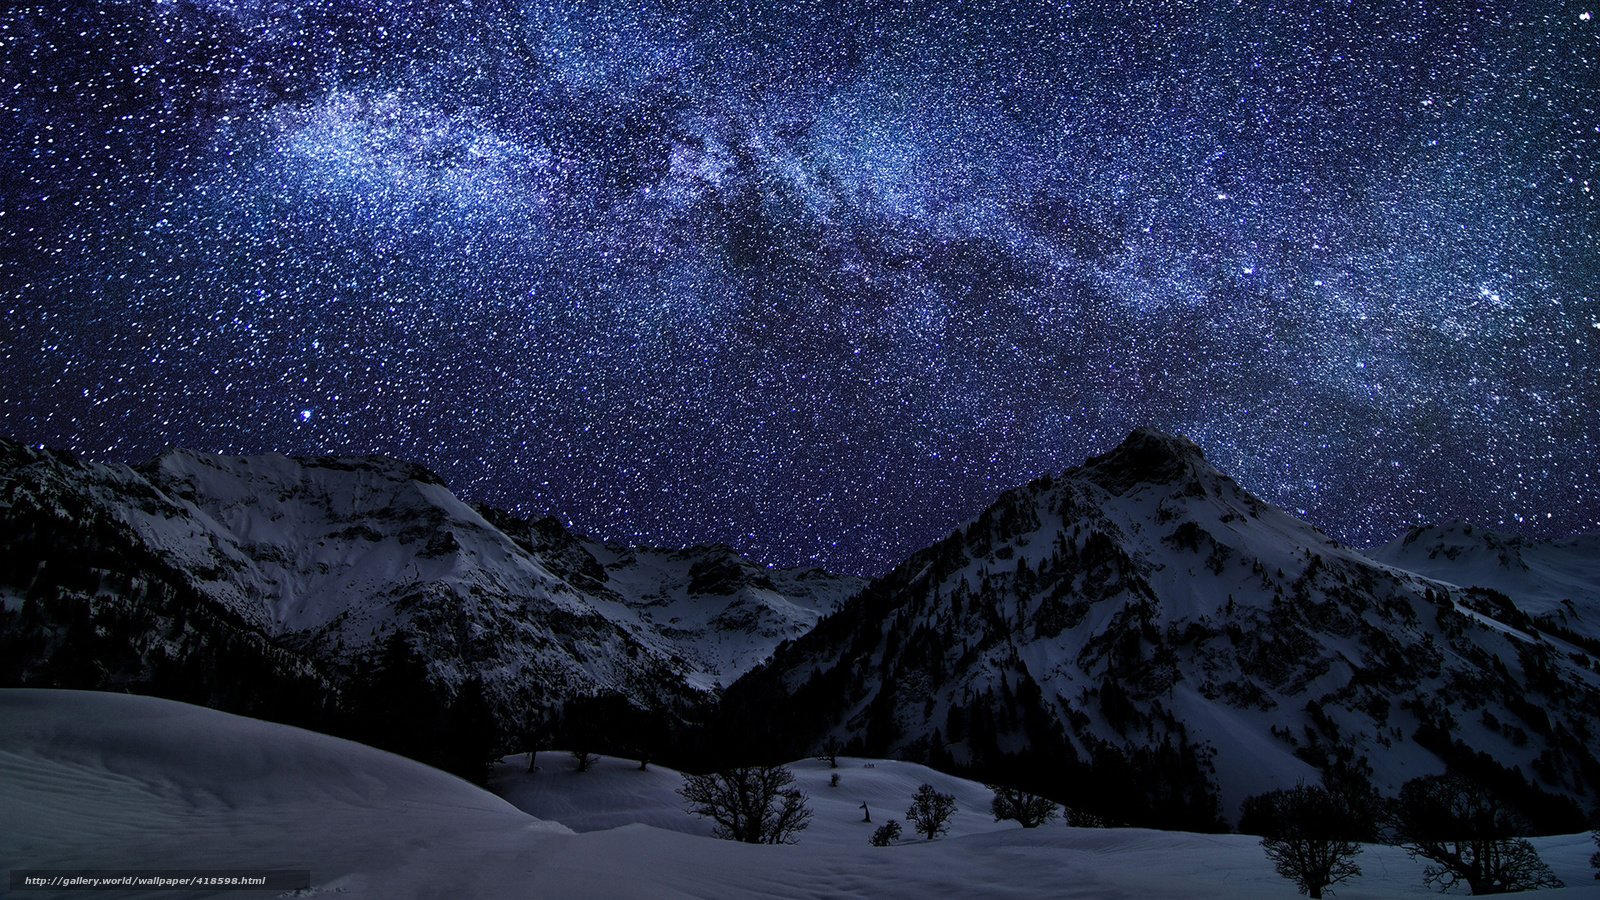 Starry night in the mountains wallpaper   992772